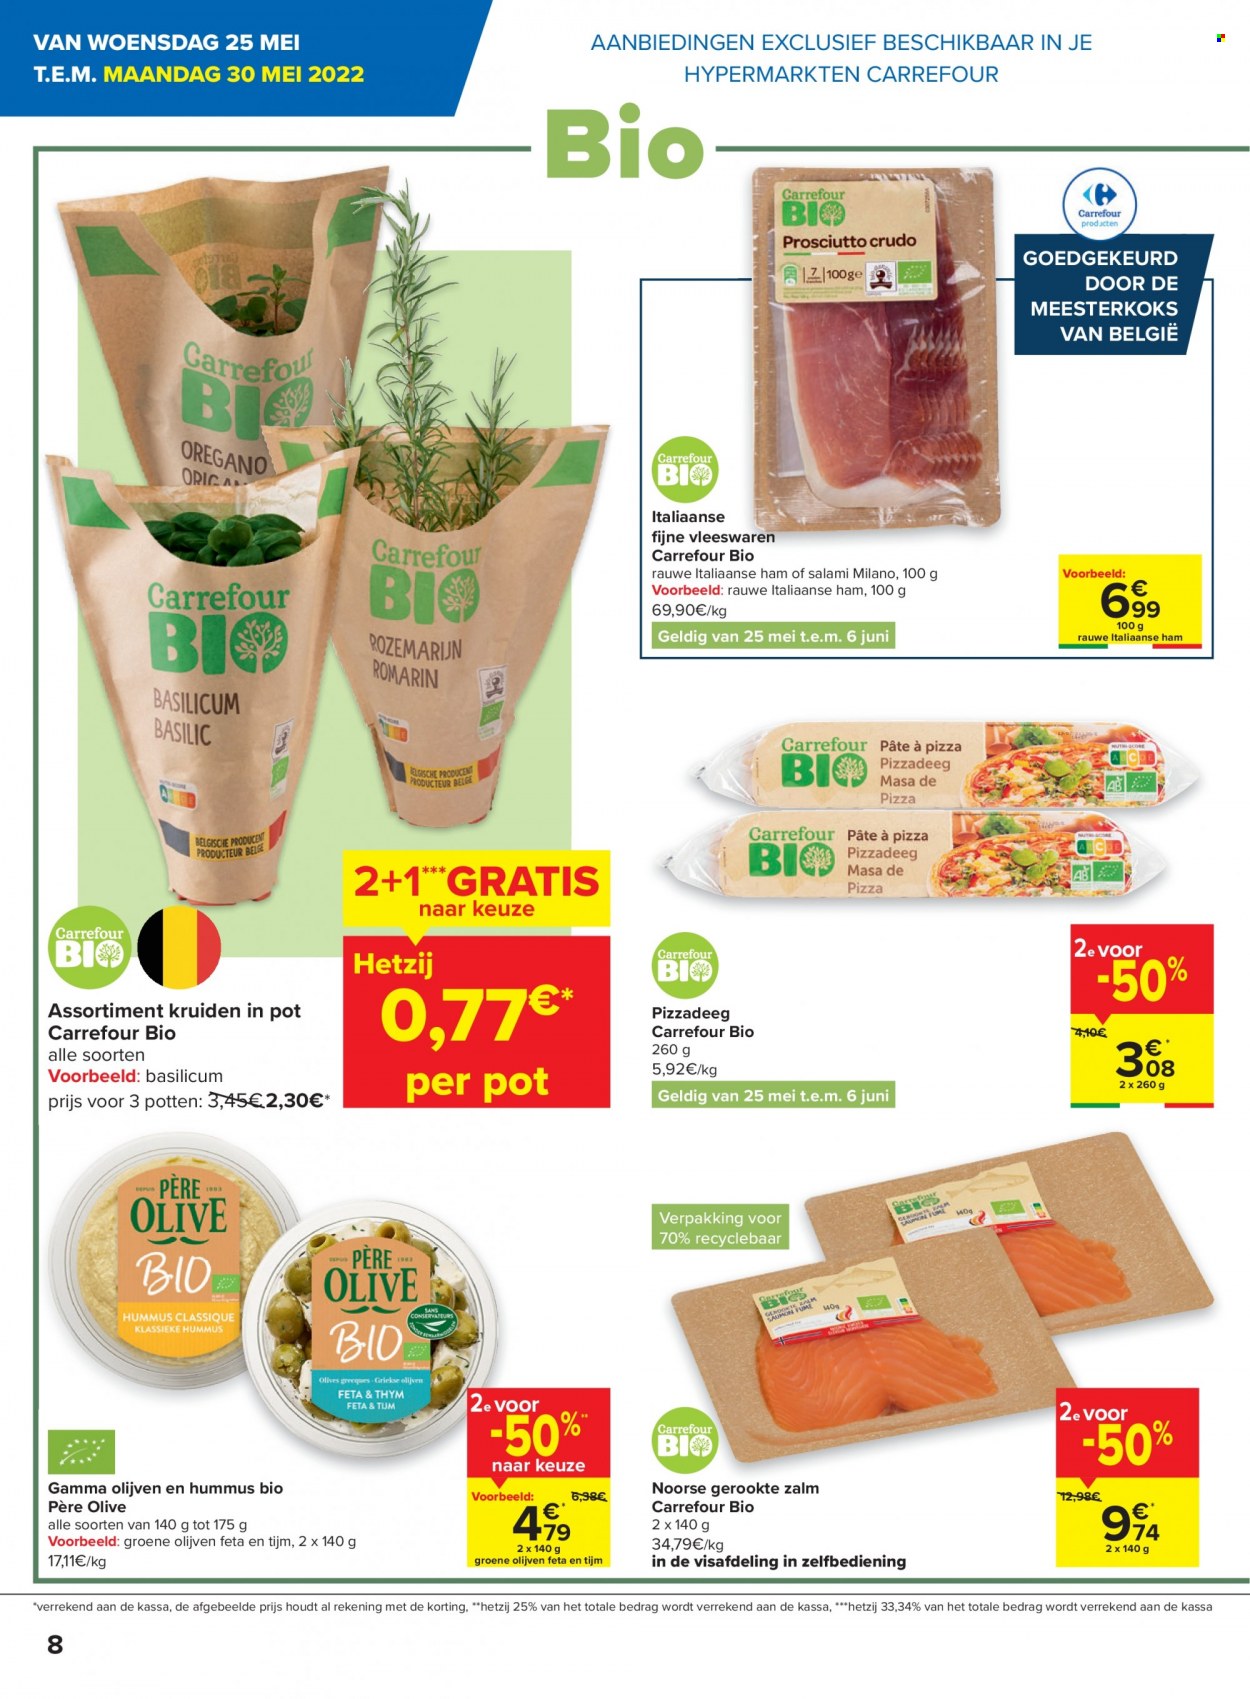 Catalogue Carrefour hypermarkt - 24.5.2022 - 30.5.2022. Page 8.